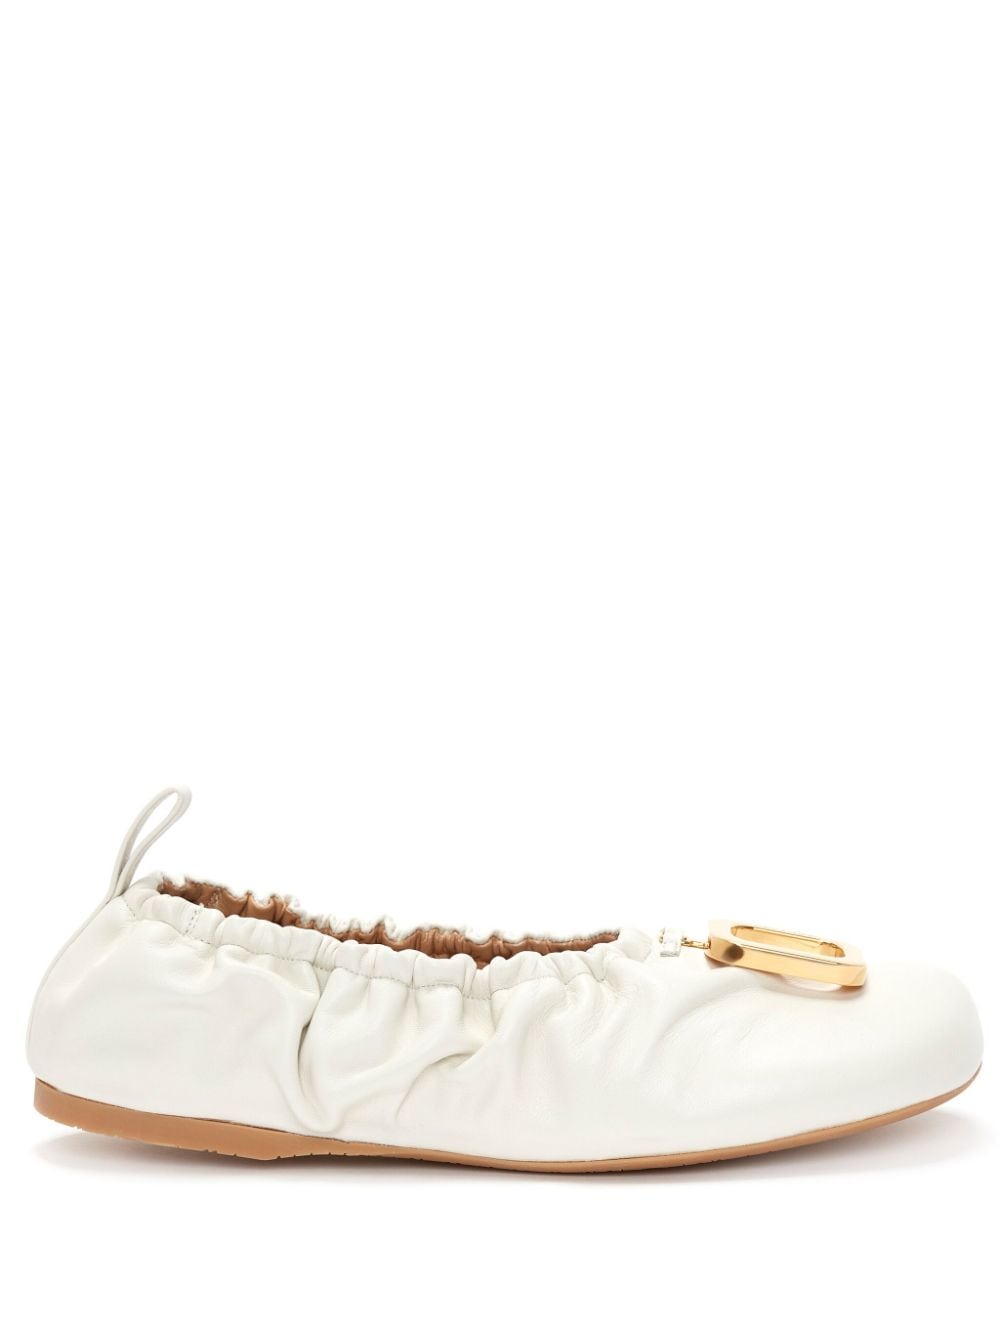 JW Anderson JWA leather ballerina shoes - White